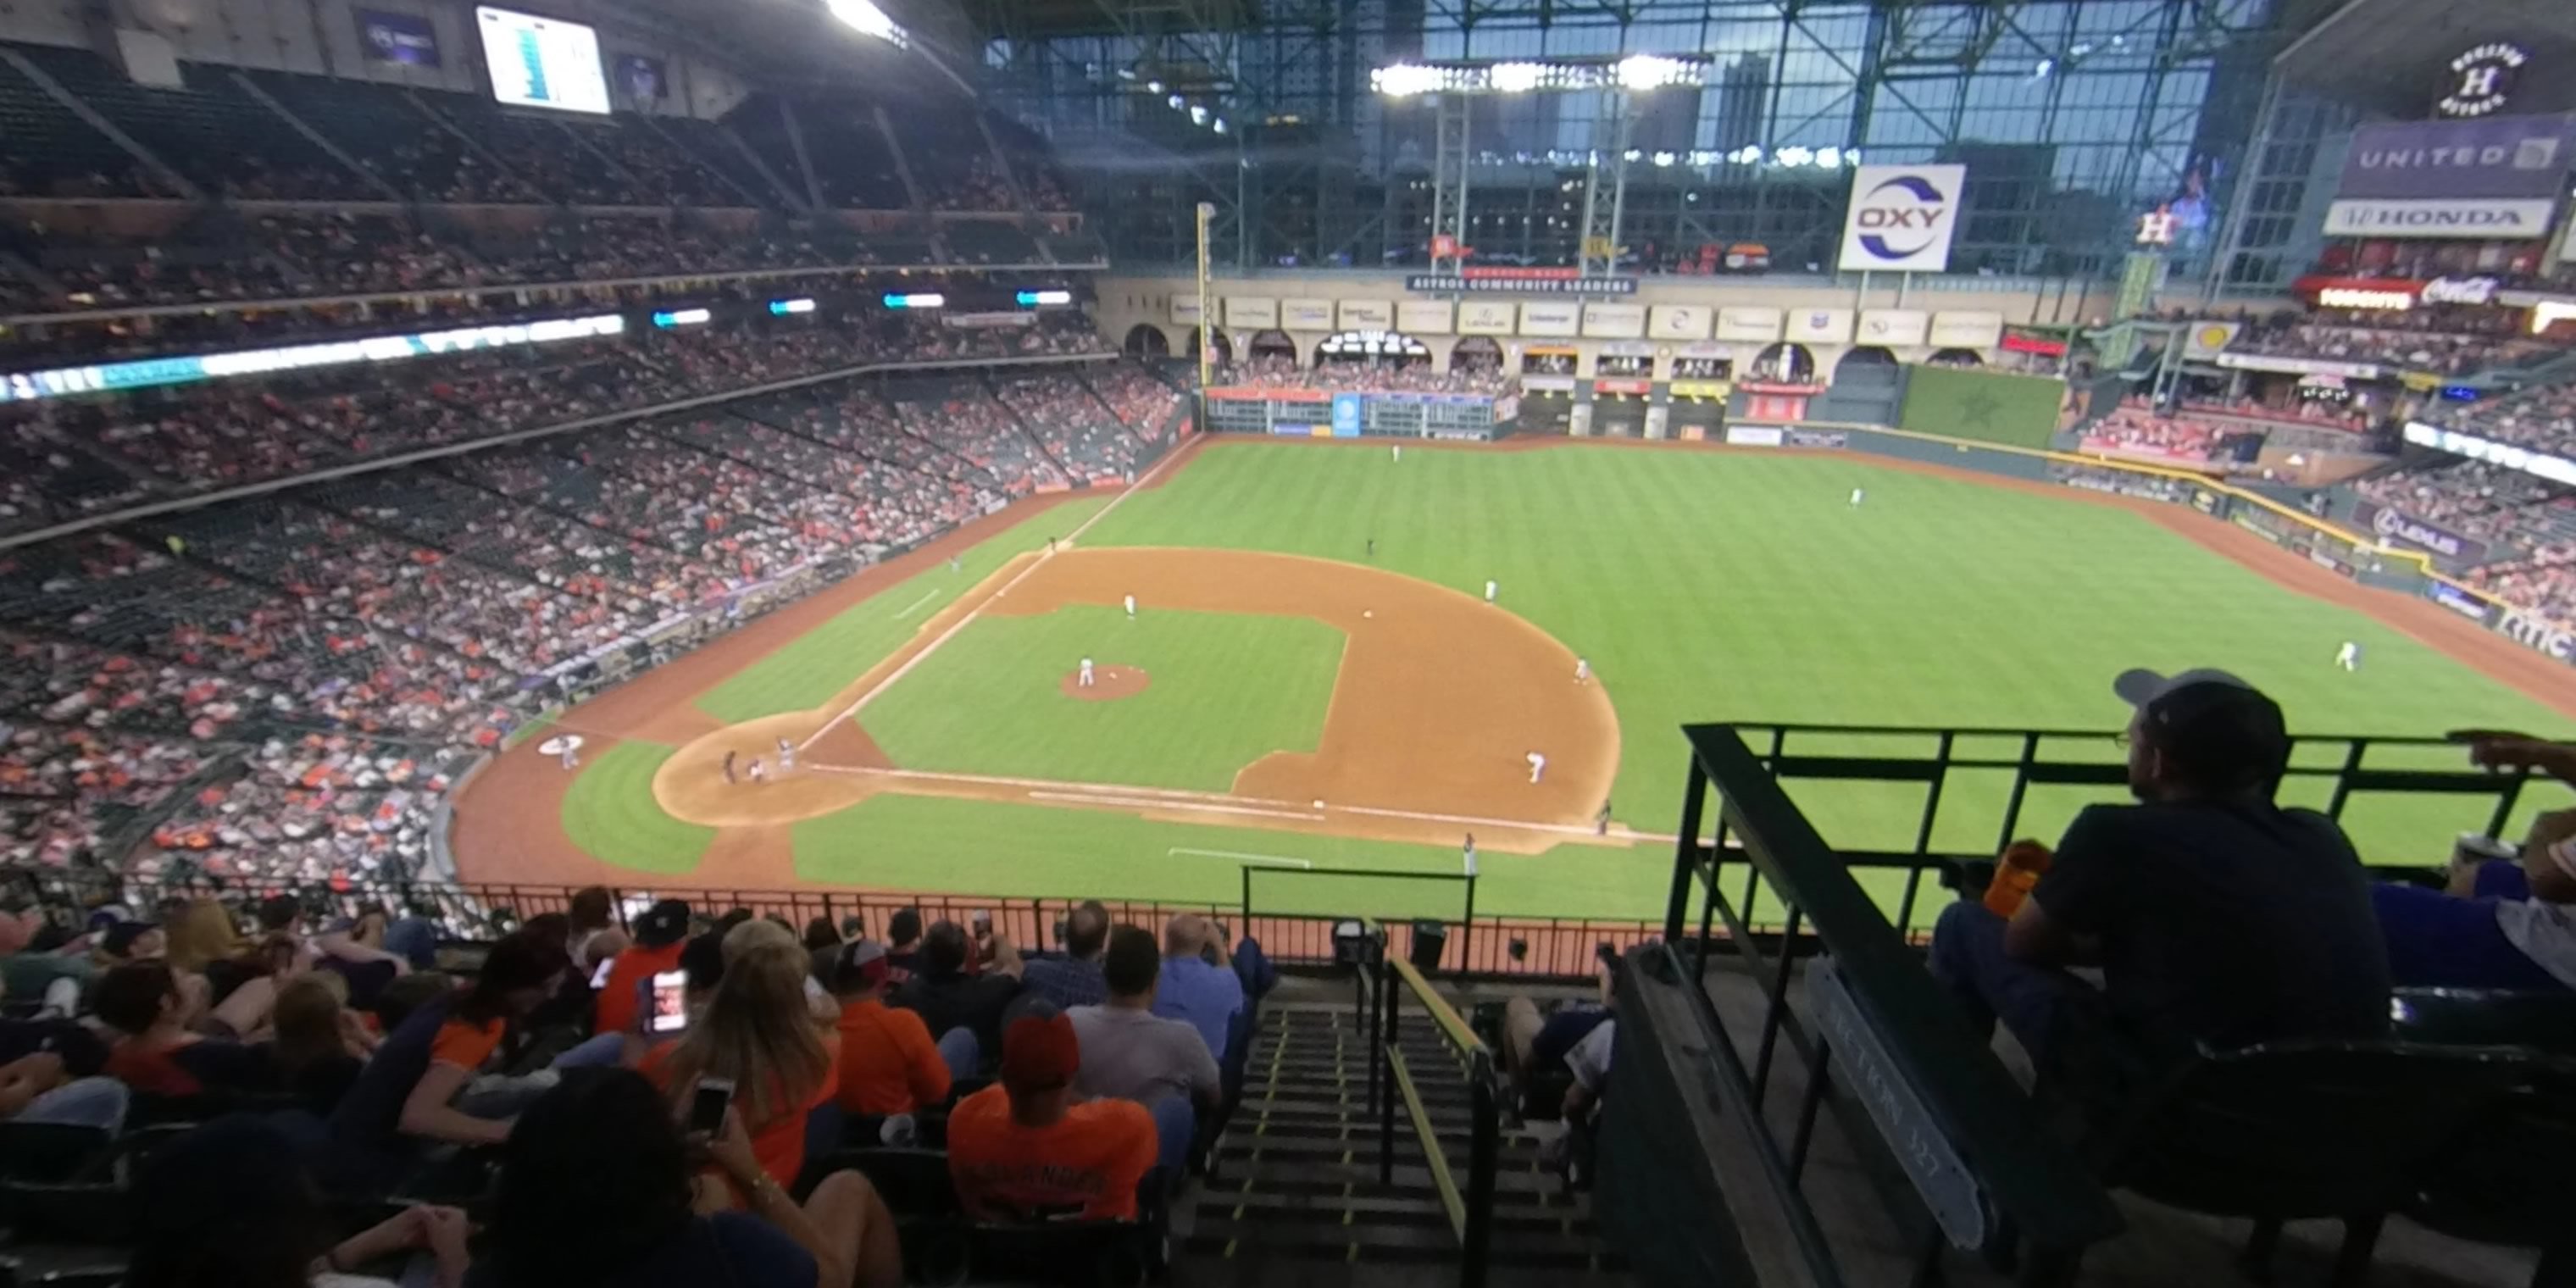 section 325 panoramic seat view  for baseball - minute maid park